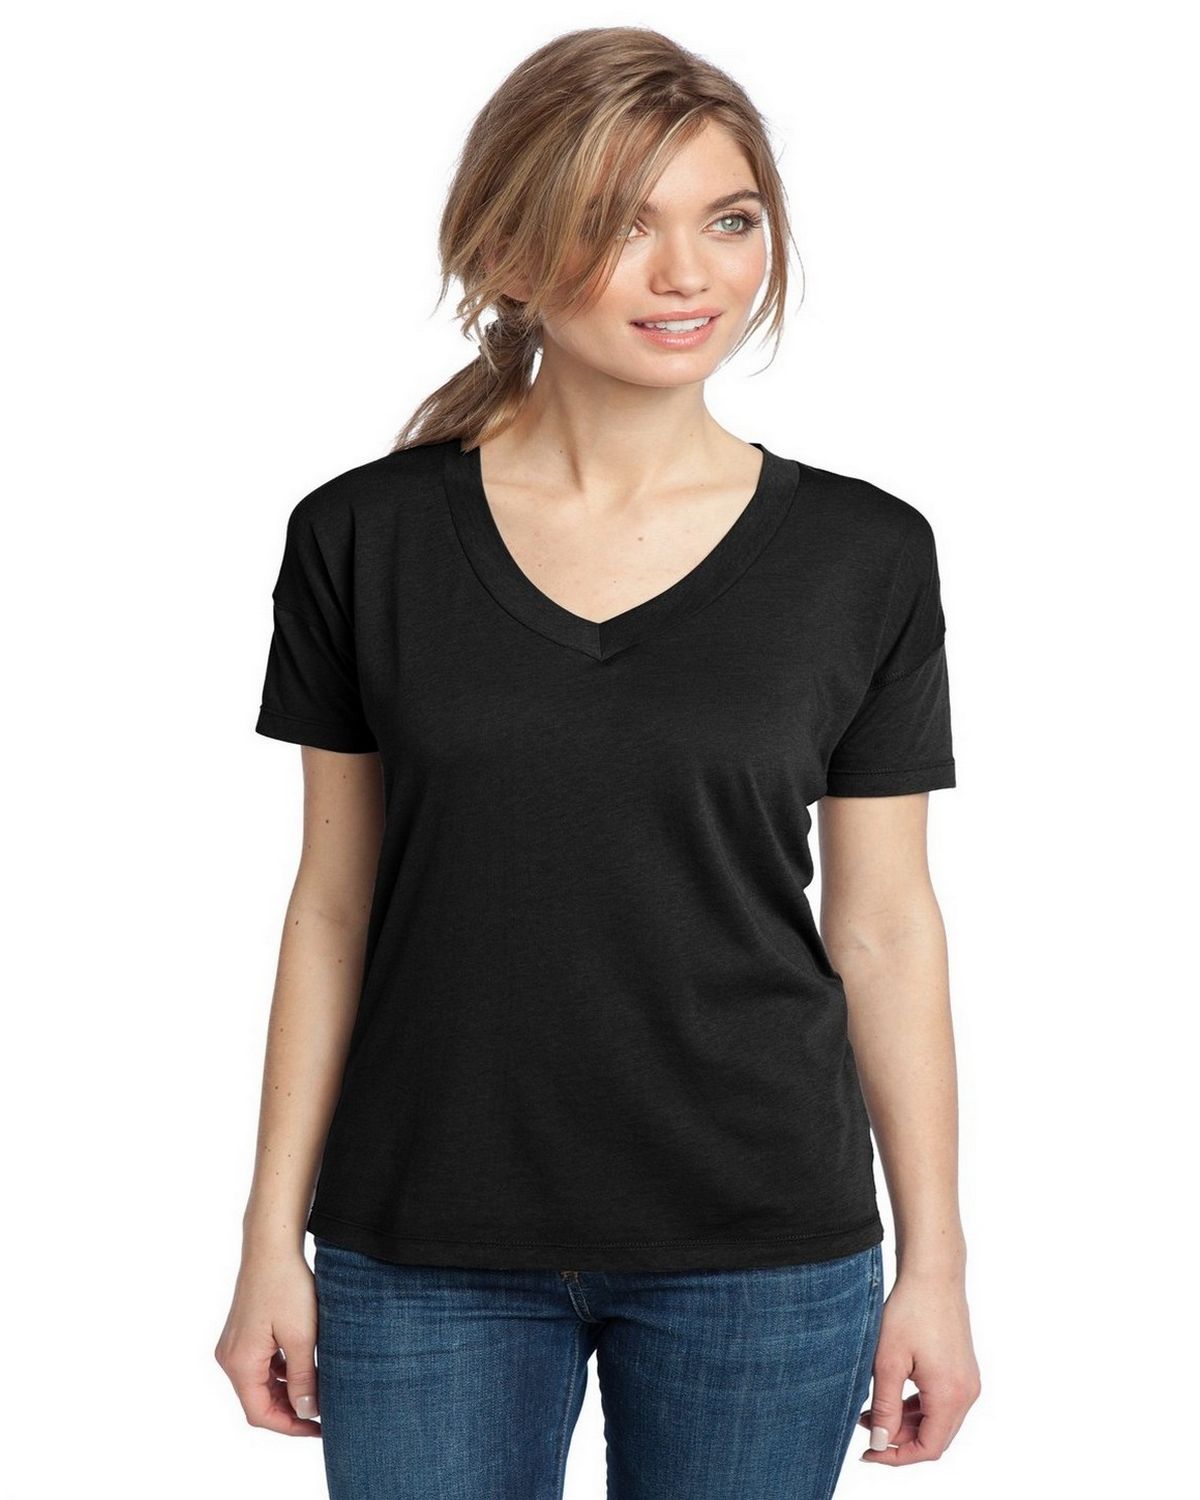 Buy District Made DM480 Ladies Modal Blend Relaxed V-Neck Tee